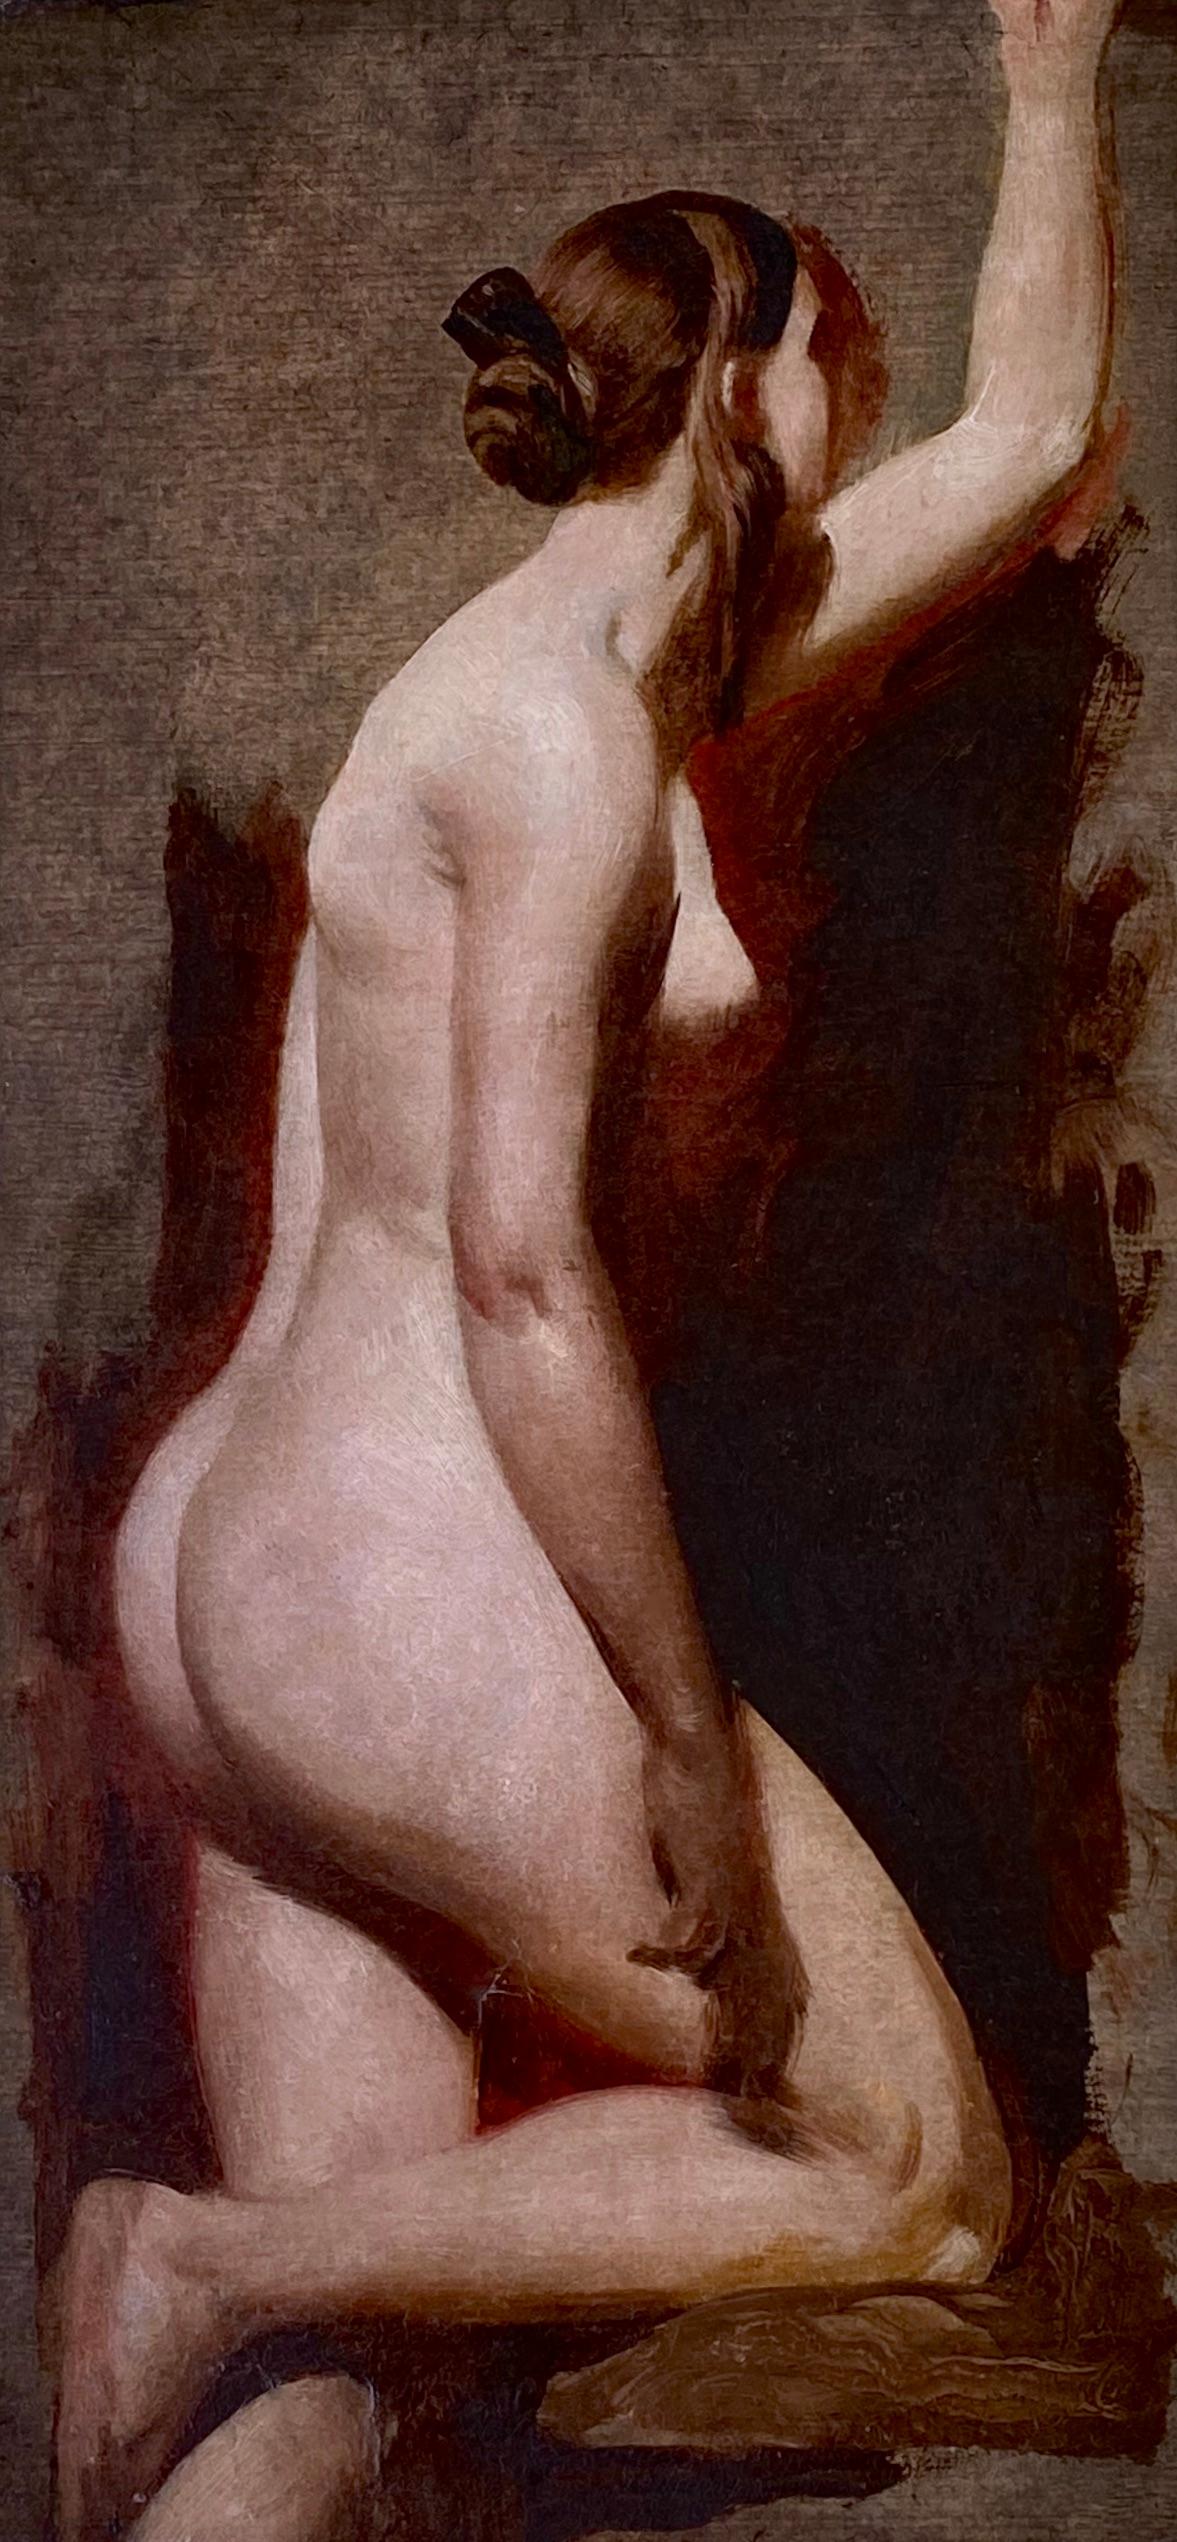 19th Century English Portrait of a Female Nude - Painting by William Etty R.A.